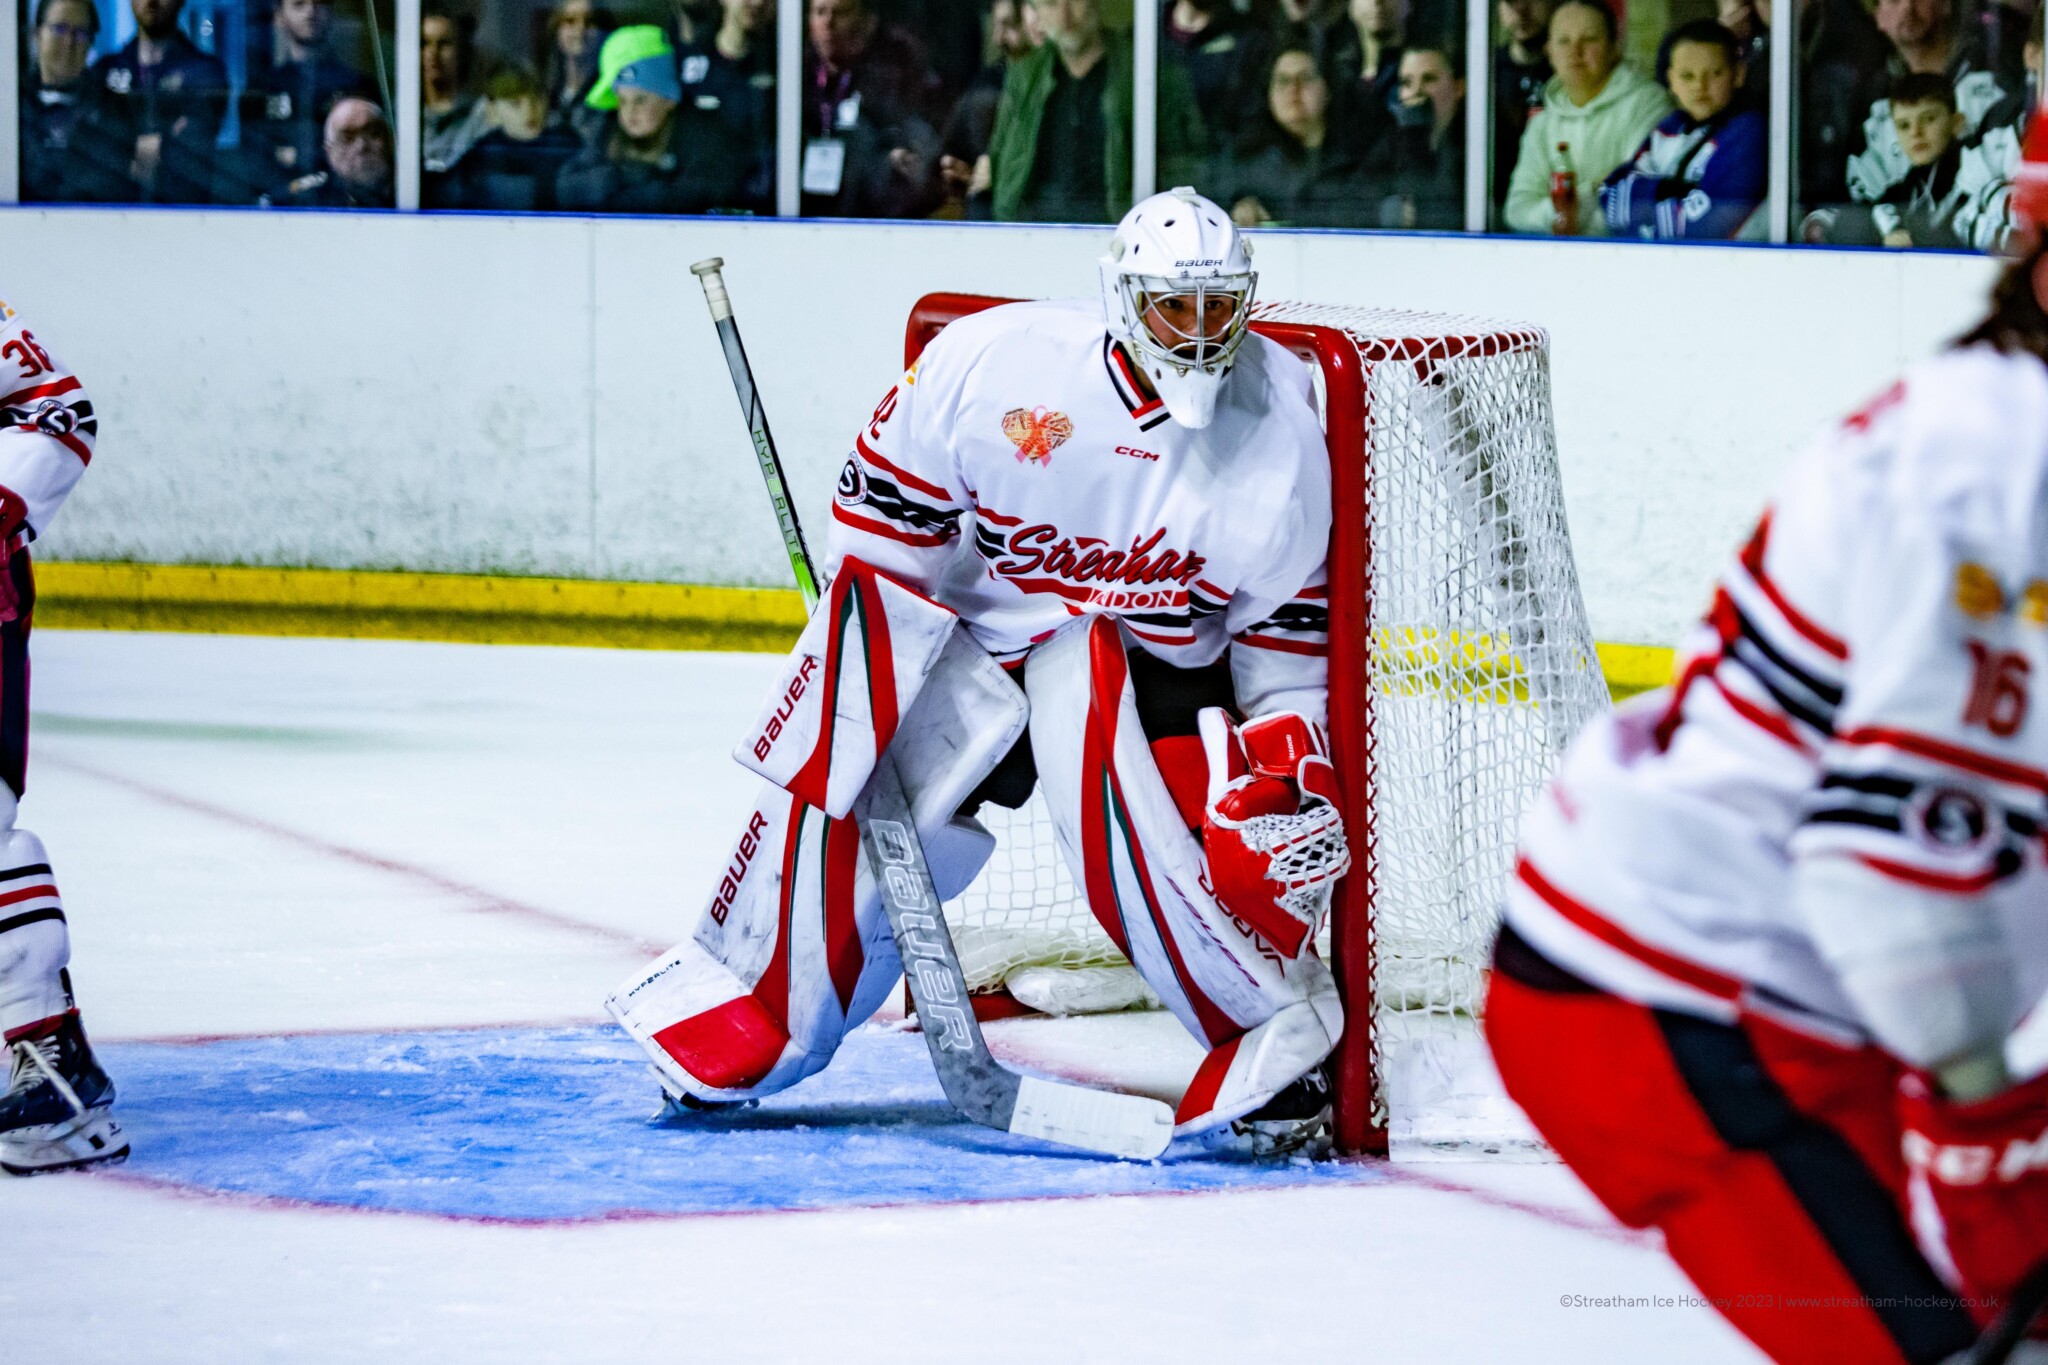 Ice-hockey: Streatham's Grand Slam dream ended by Solent Devils - South London News